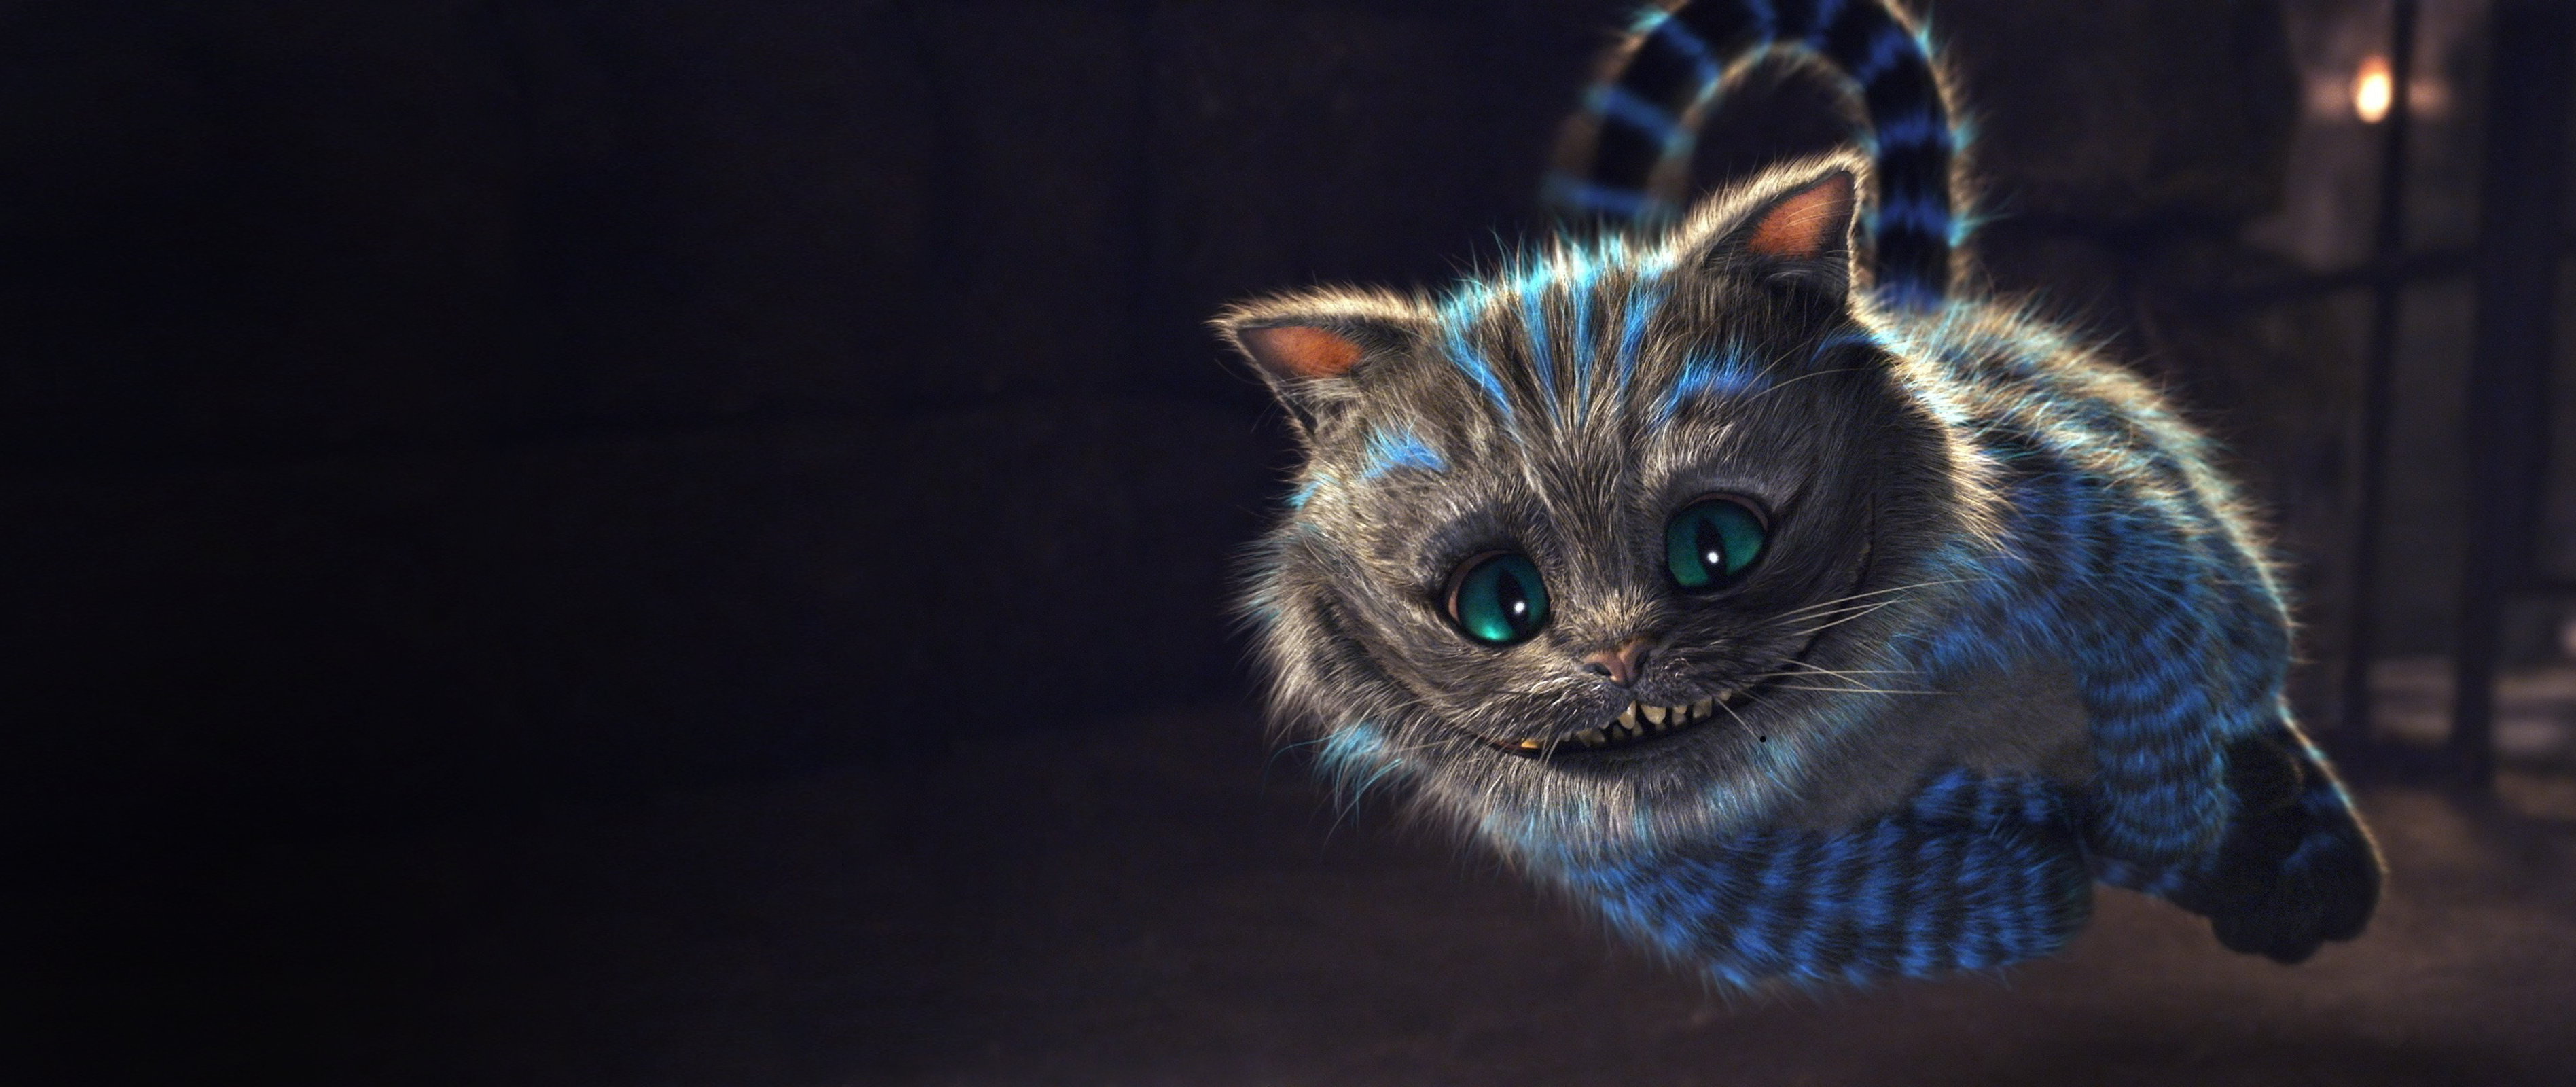 General 3792x1600 Cheshire Cat cats Alice in Wonderland smiling furry ultrawide digital art